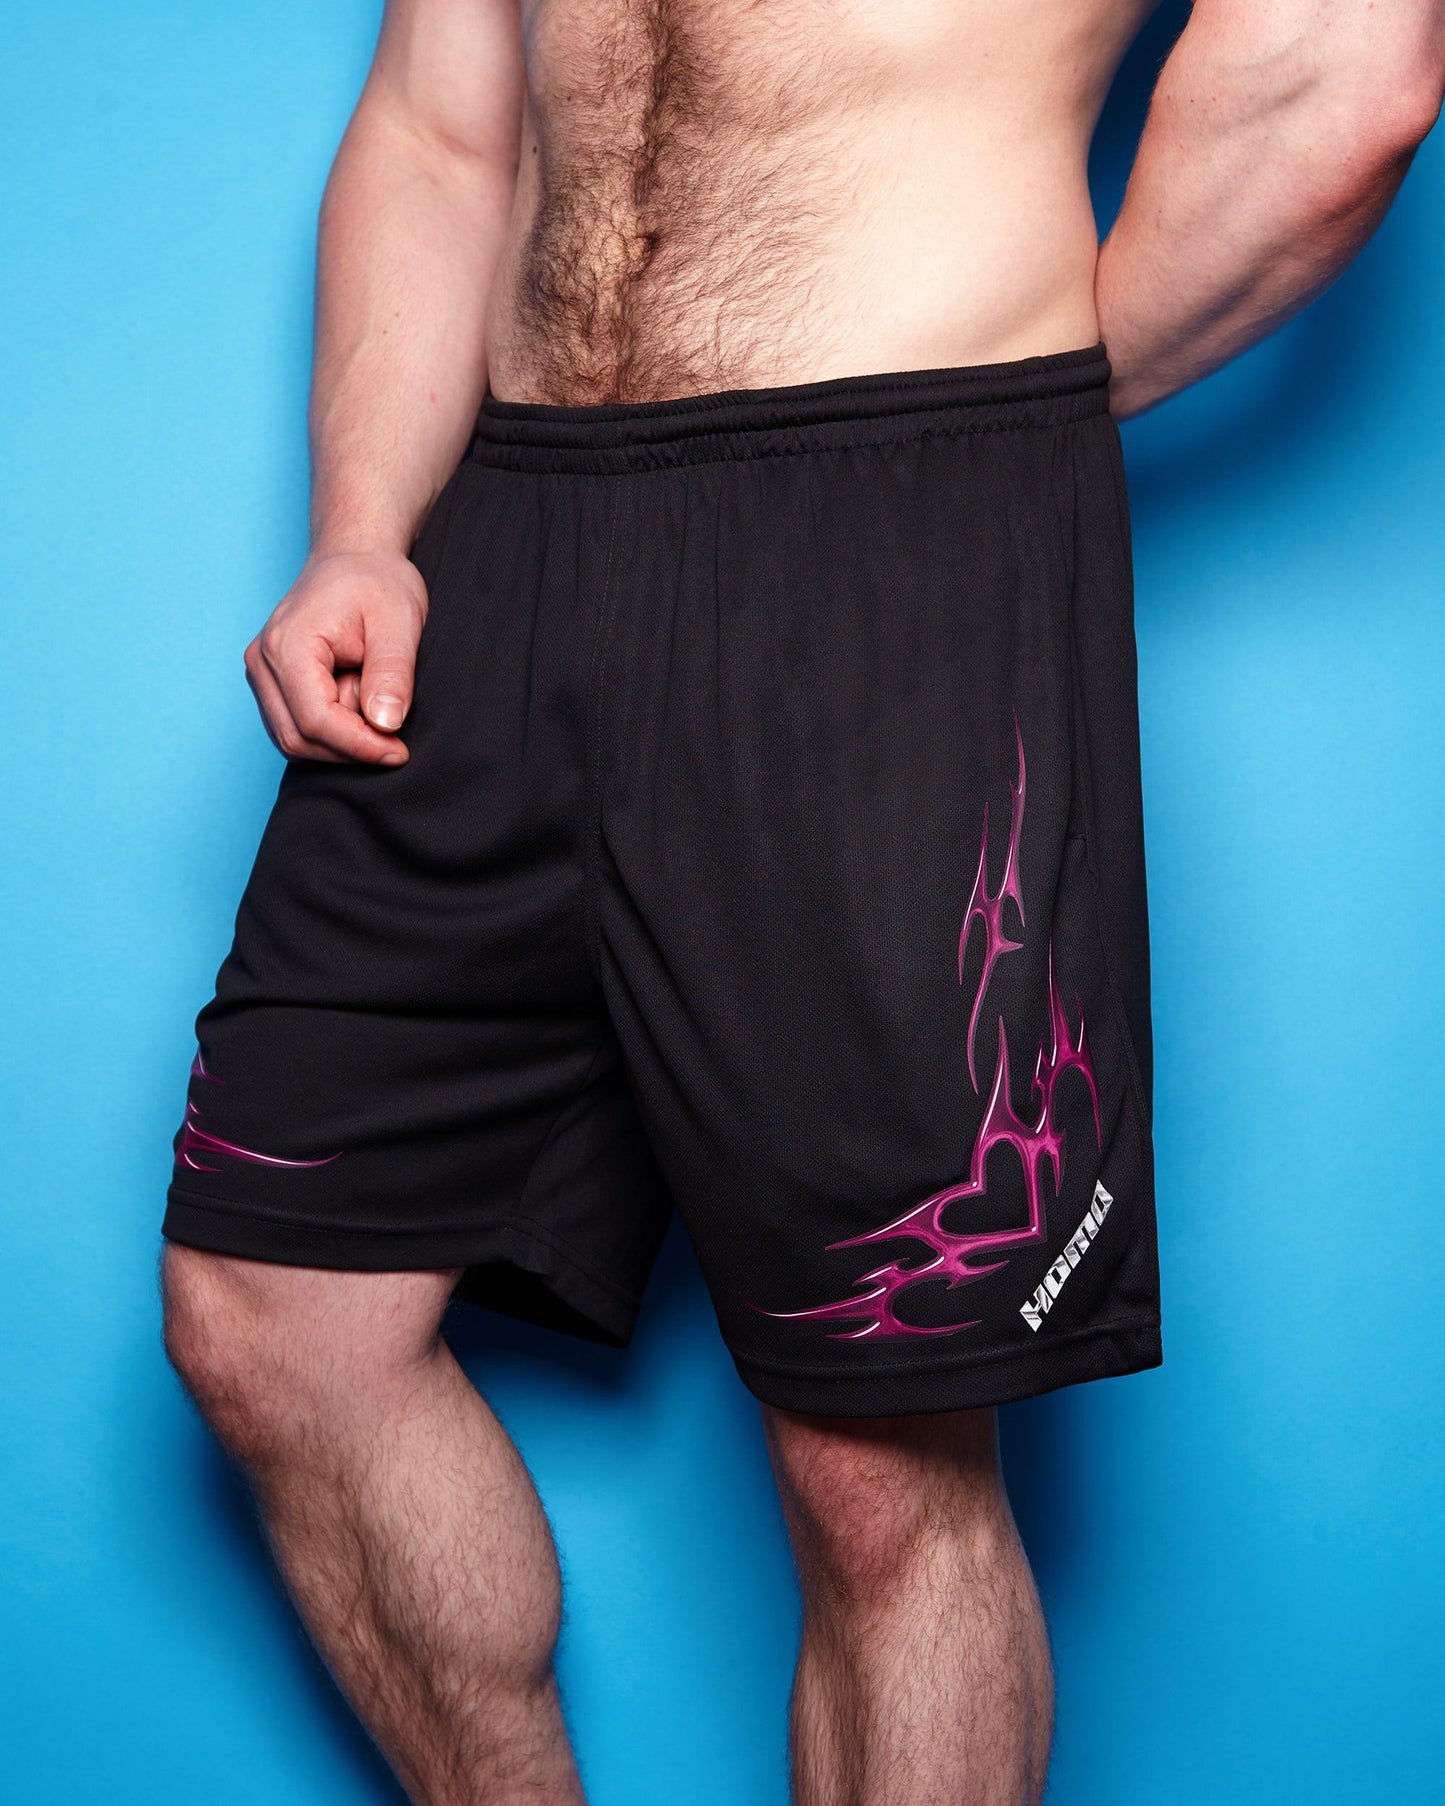 Chrome Y2K: HOMO, silver and pink on black - basket ball shorts